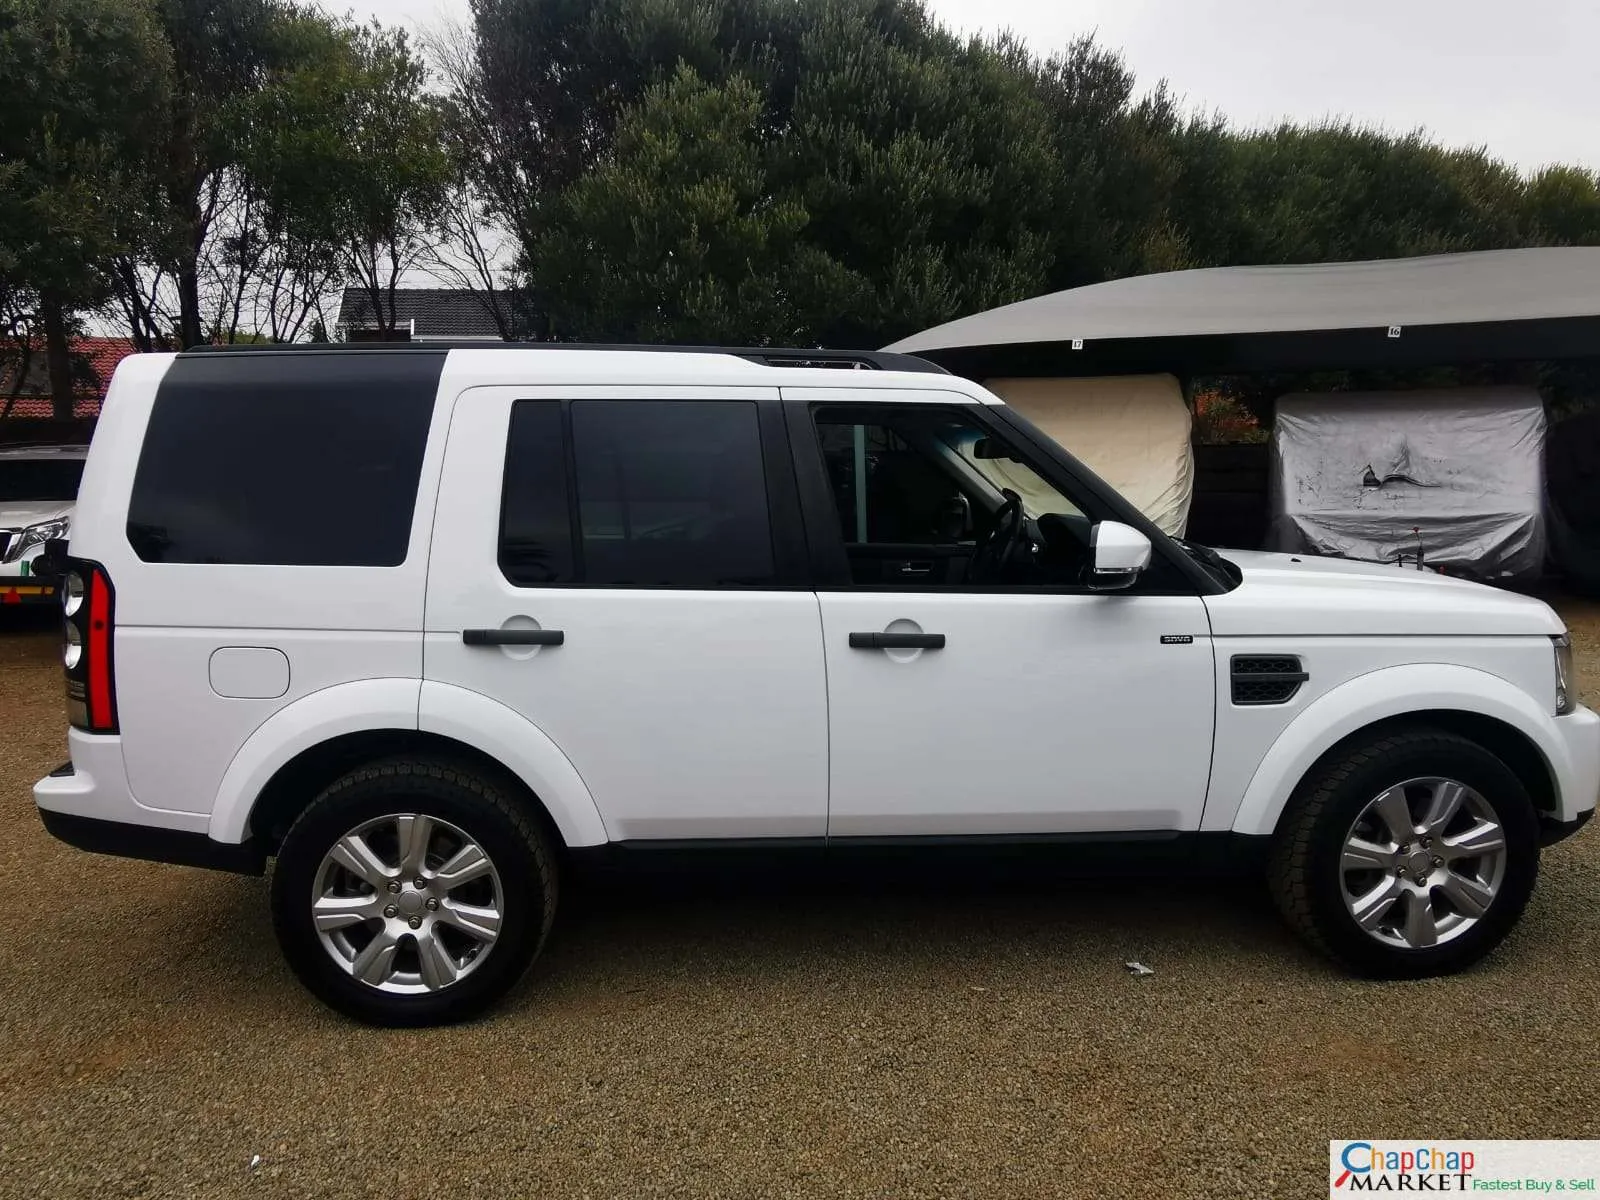 Land Rover Discovery 4 for sale in Kenya QUICK SALE Triple SUNROOF Trade in Ok EXCLUSIVE